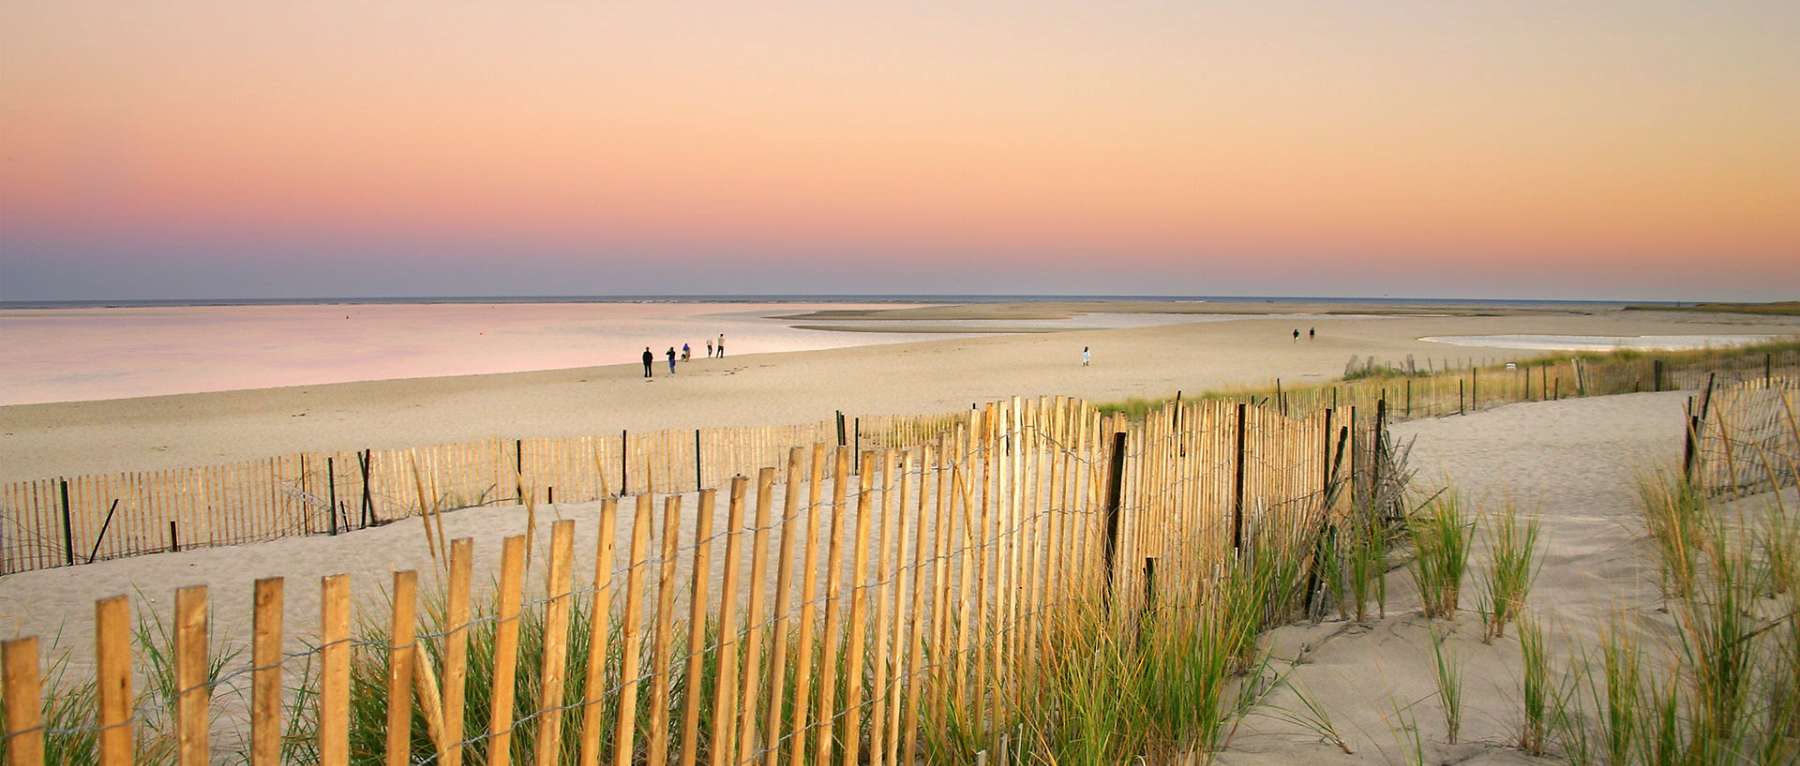 Summer on Cape Cod's Beaches - Great Things To Do